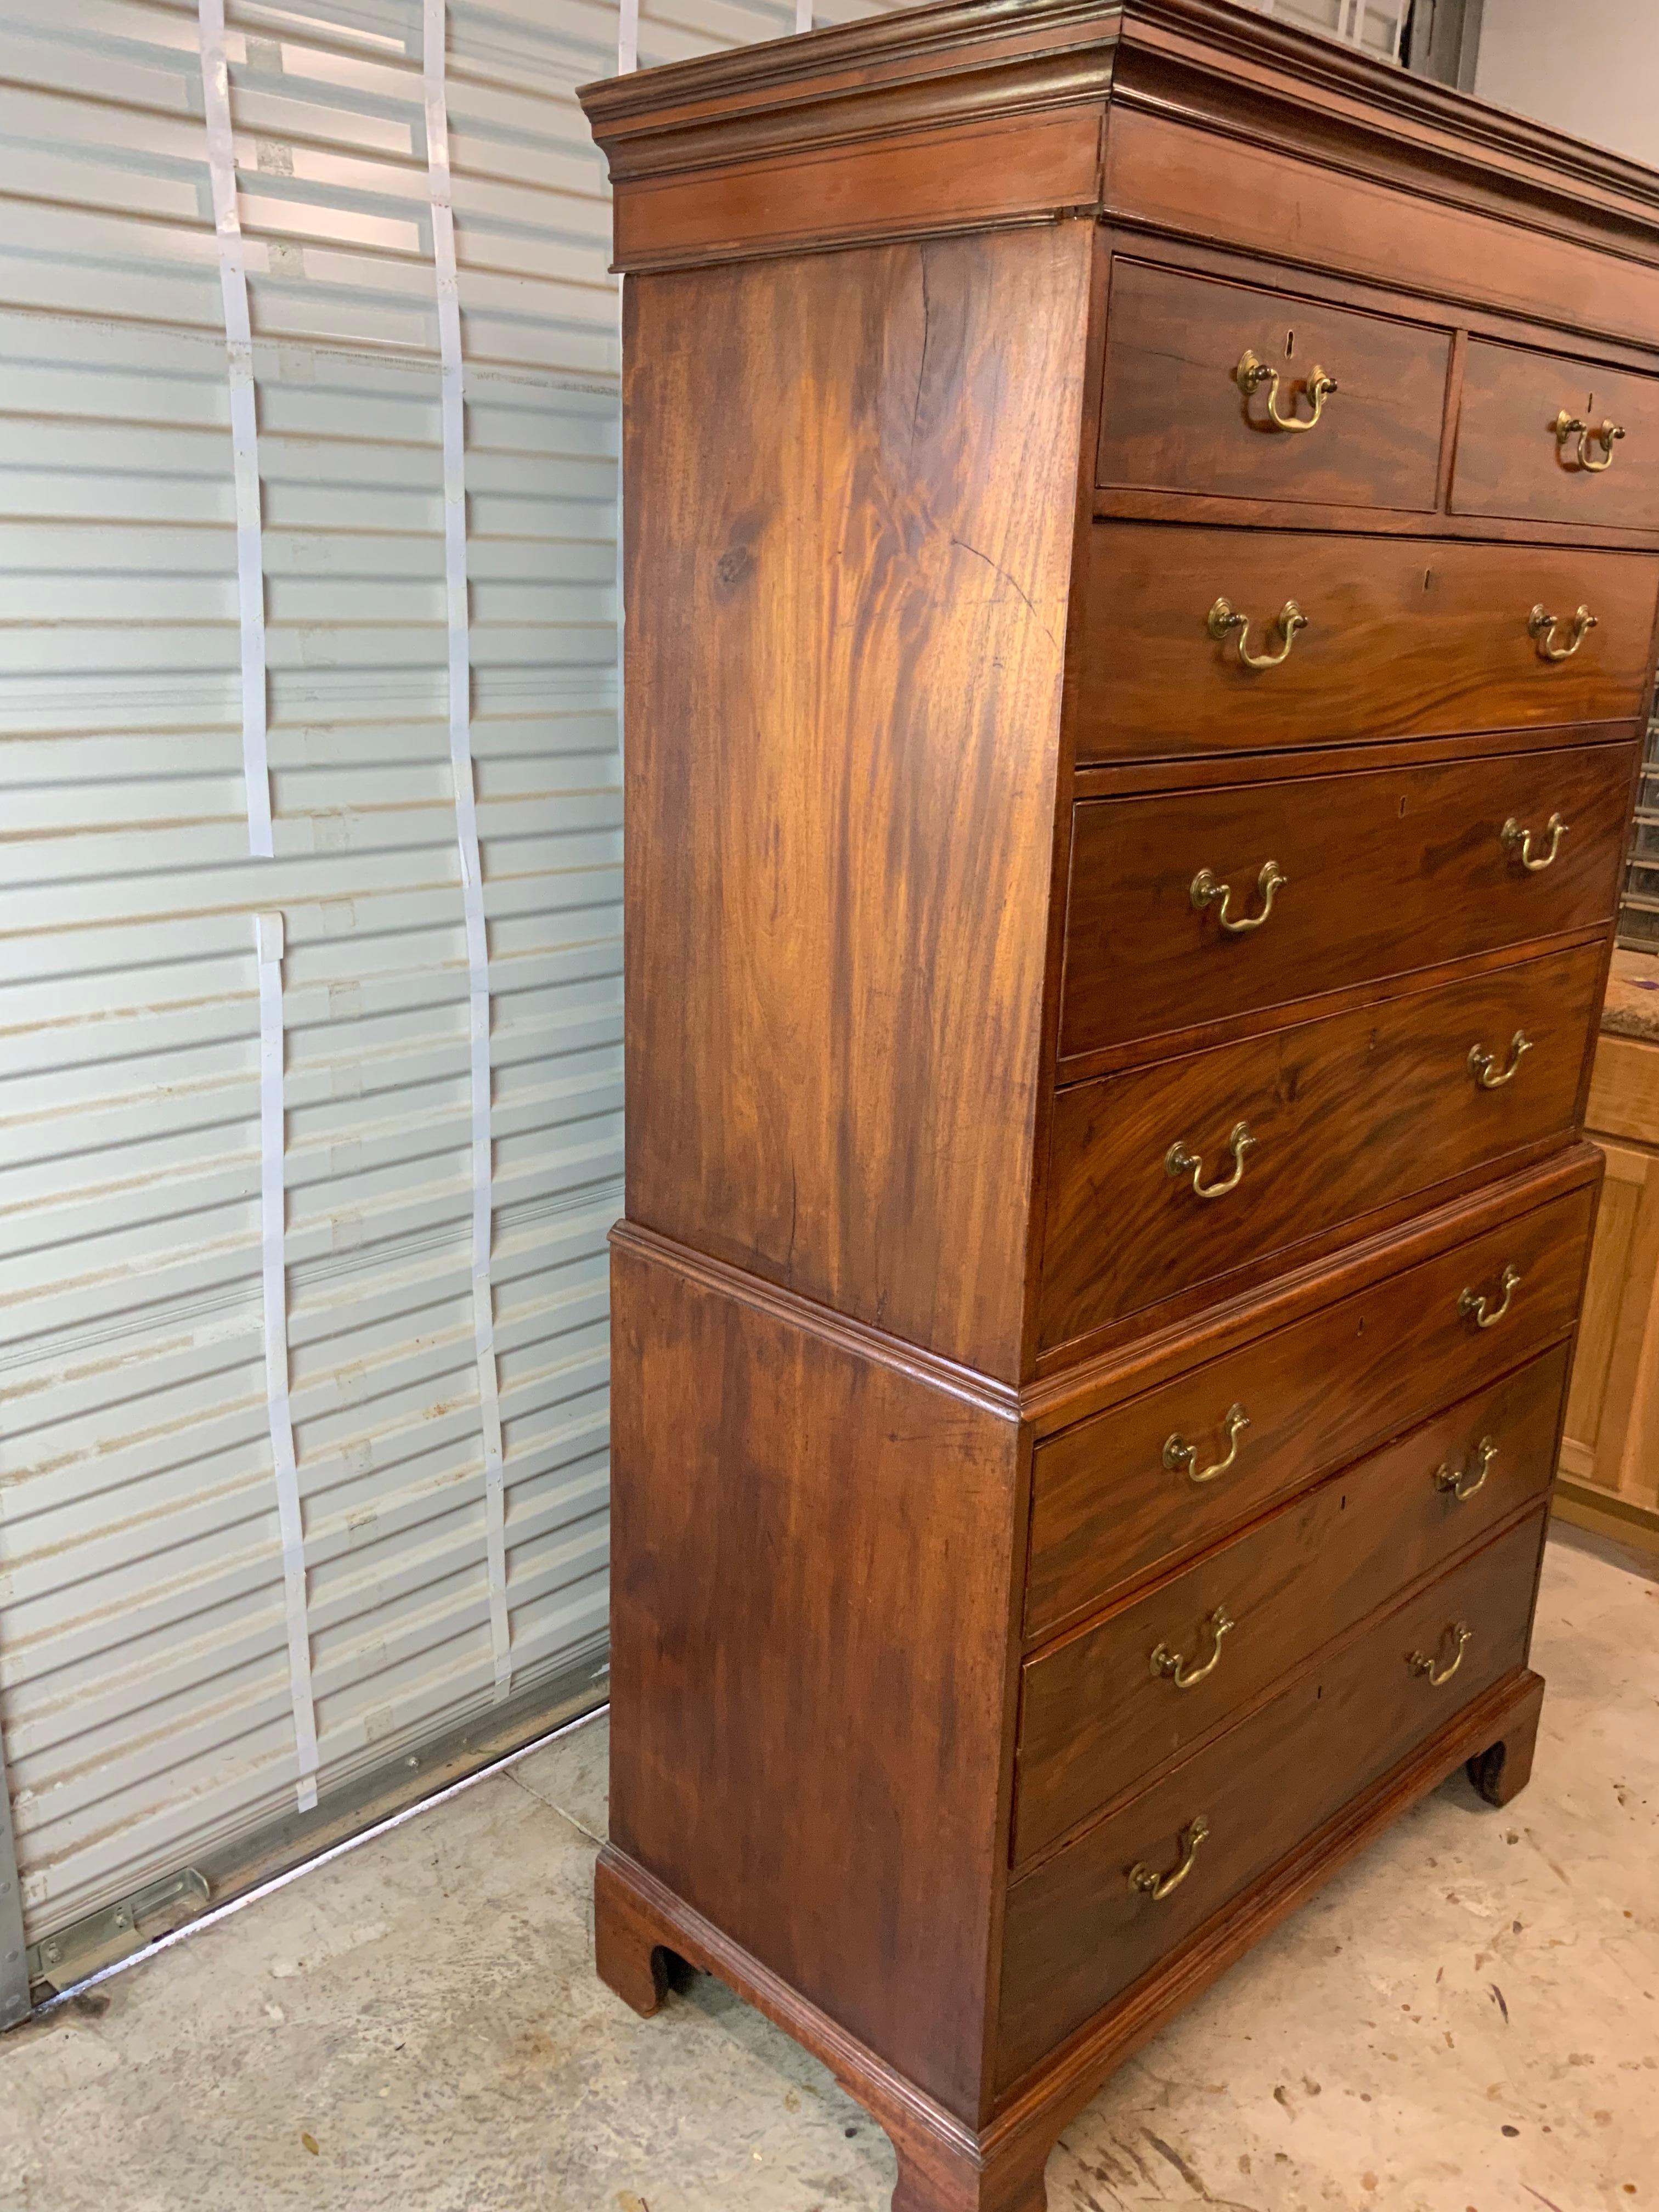 A nice clean Georgian Mahogany chest on chest. Solid Mahogany case with Pine and Oak secondary woods. Very nice mellow color and aged patina to the old finished surface. This is one of the cleanest chest on chests we’ve ever had. All drawers working